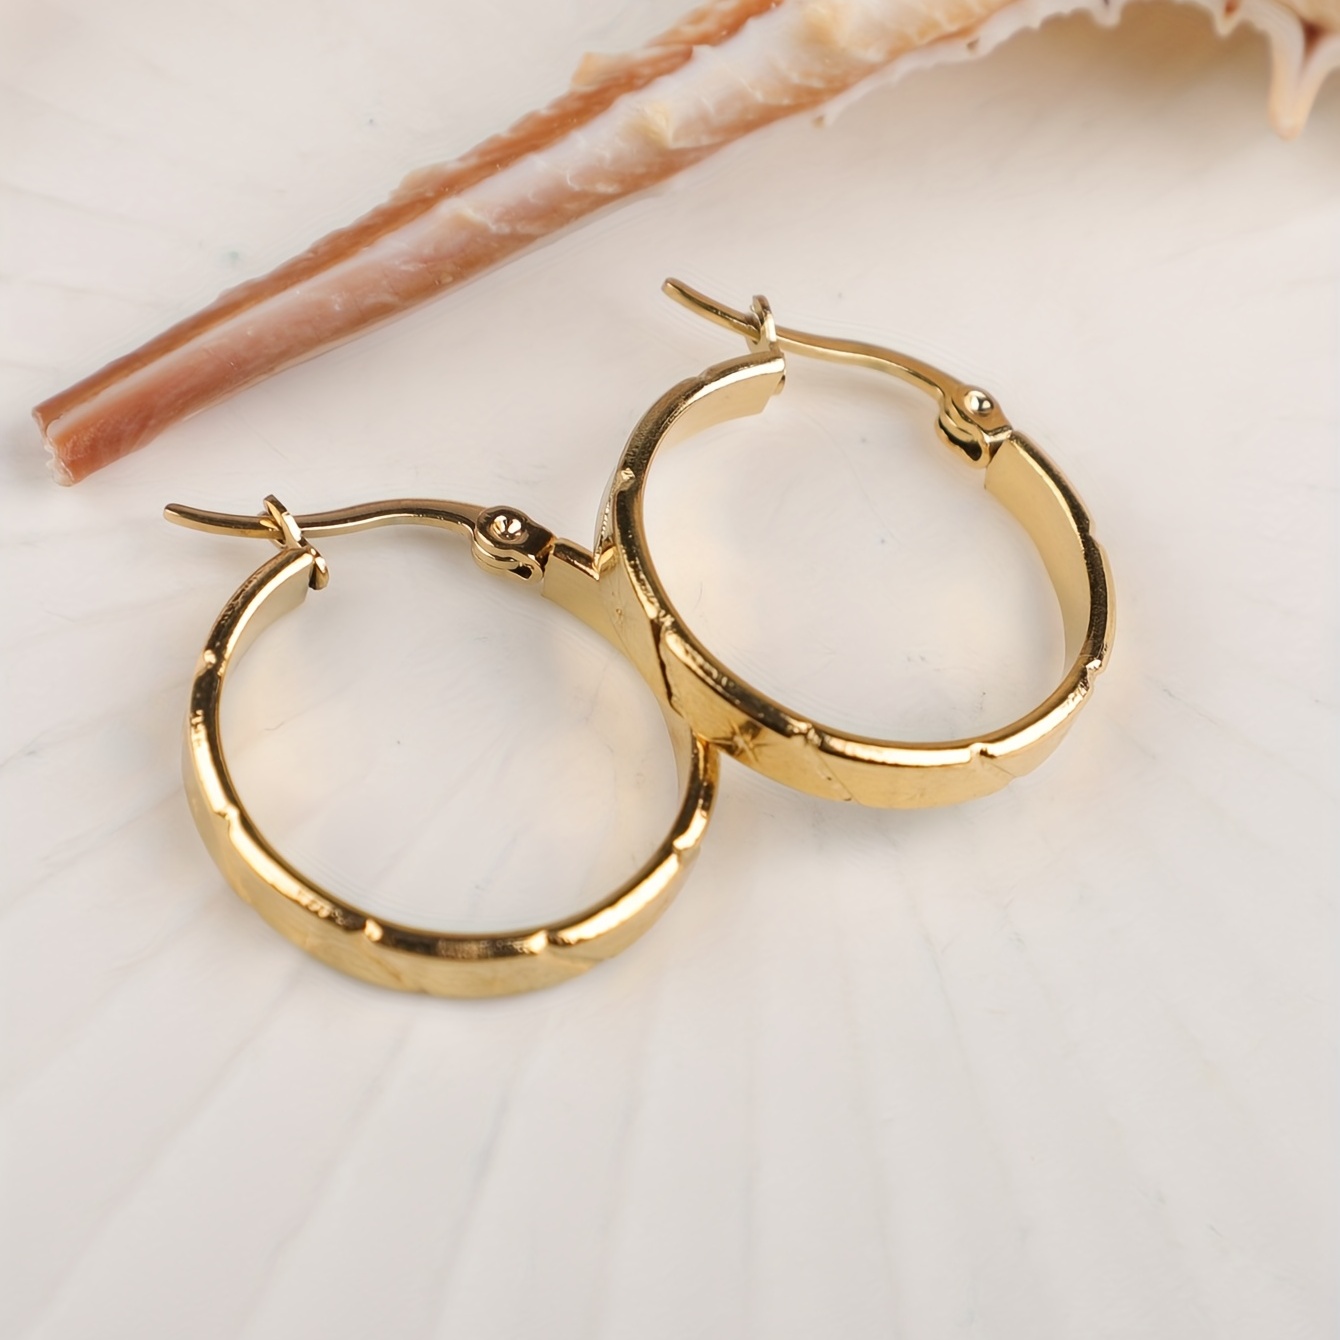 

1 Pair Of Golden Stainless Steel Rice Pattern Circle Earrings For Women Girls Hypoallergenic Ear Jewelry